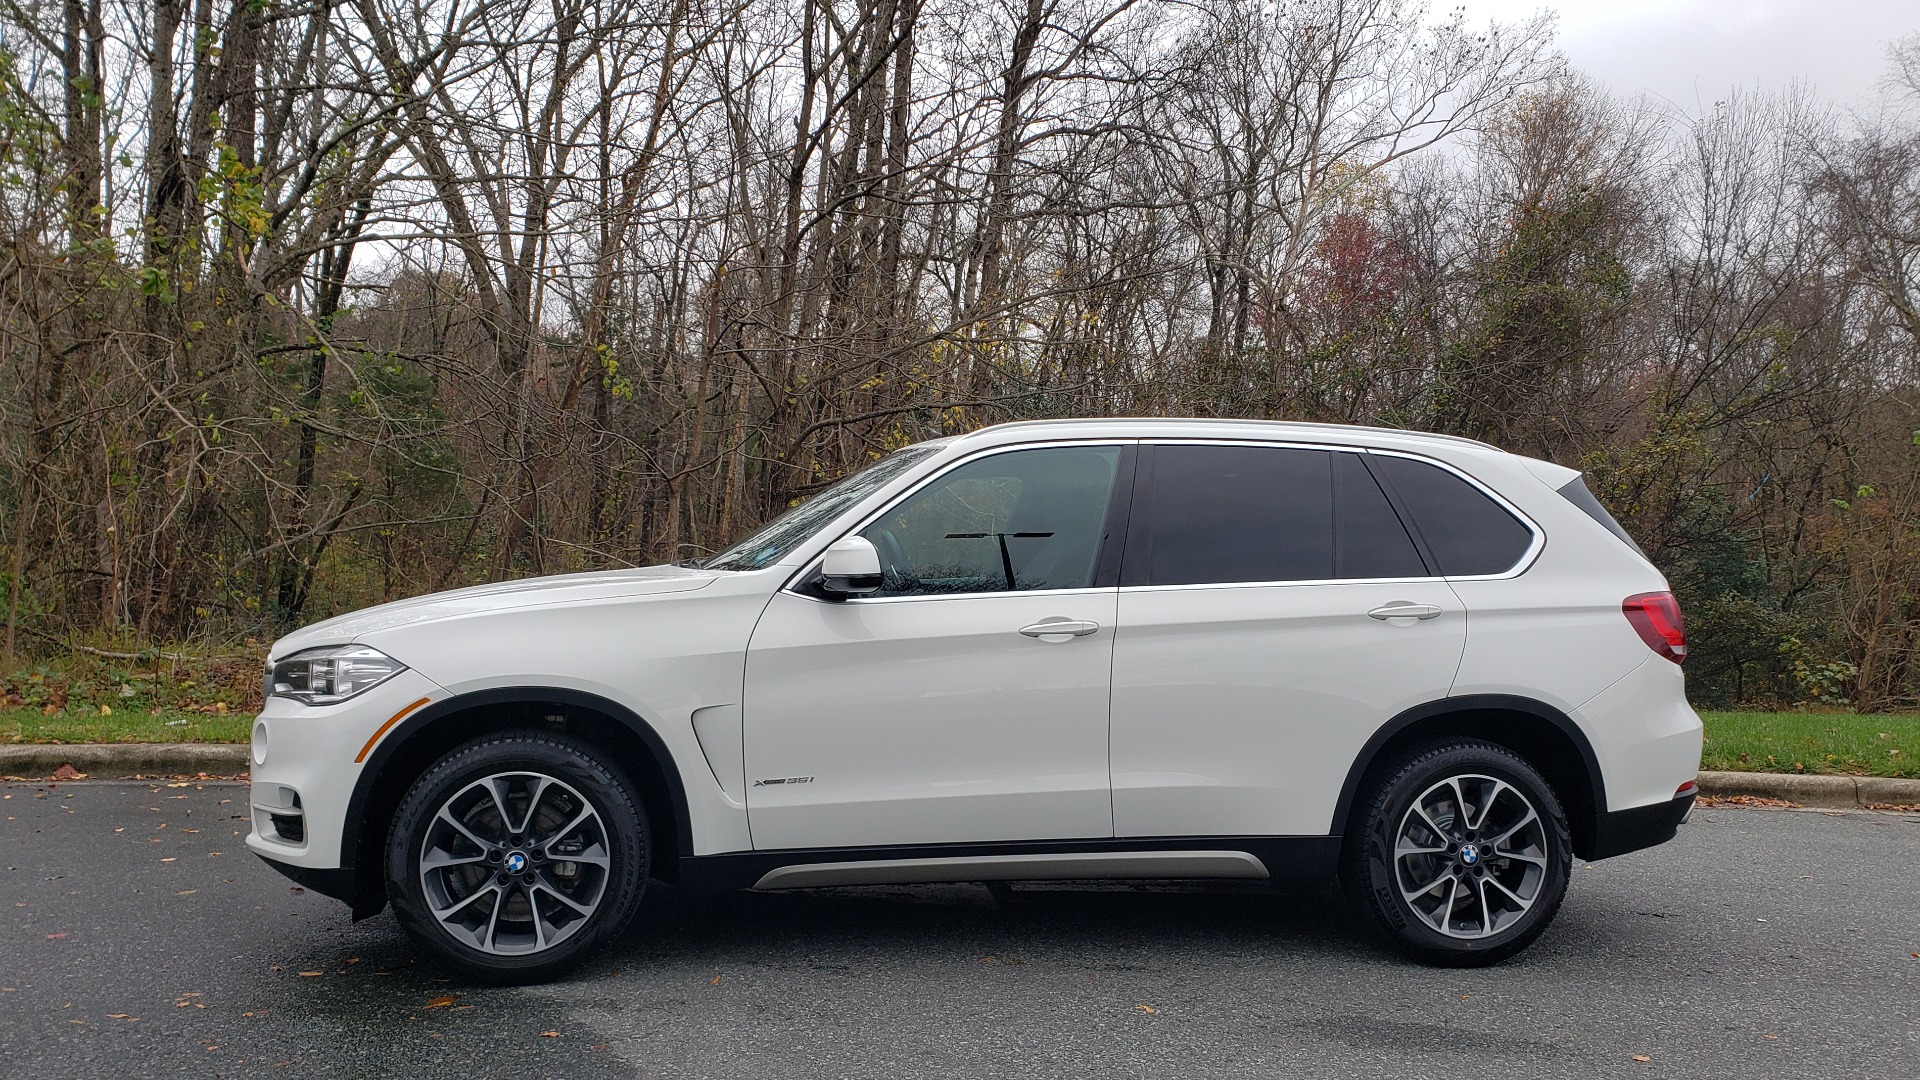 Used 2018 BMW X5 XDRIVE35I / AWD / NAV / HTD STS / SUNROOF / REARVIEW for sale Sold at Formula Imports in Charlotte NC 28227 2